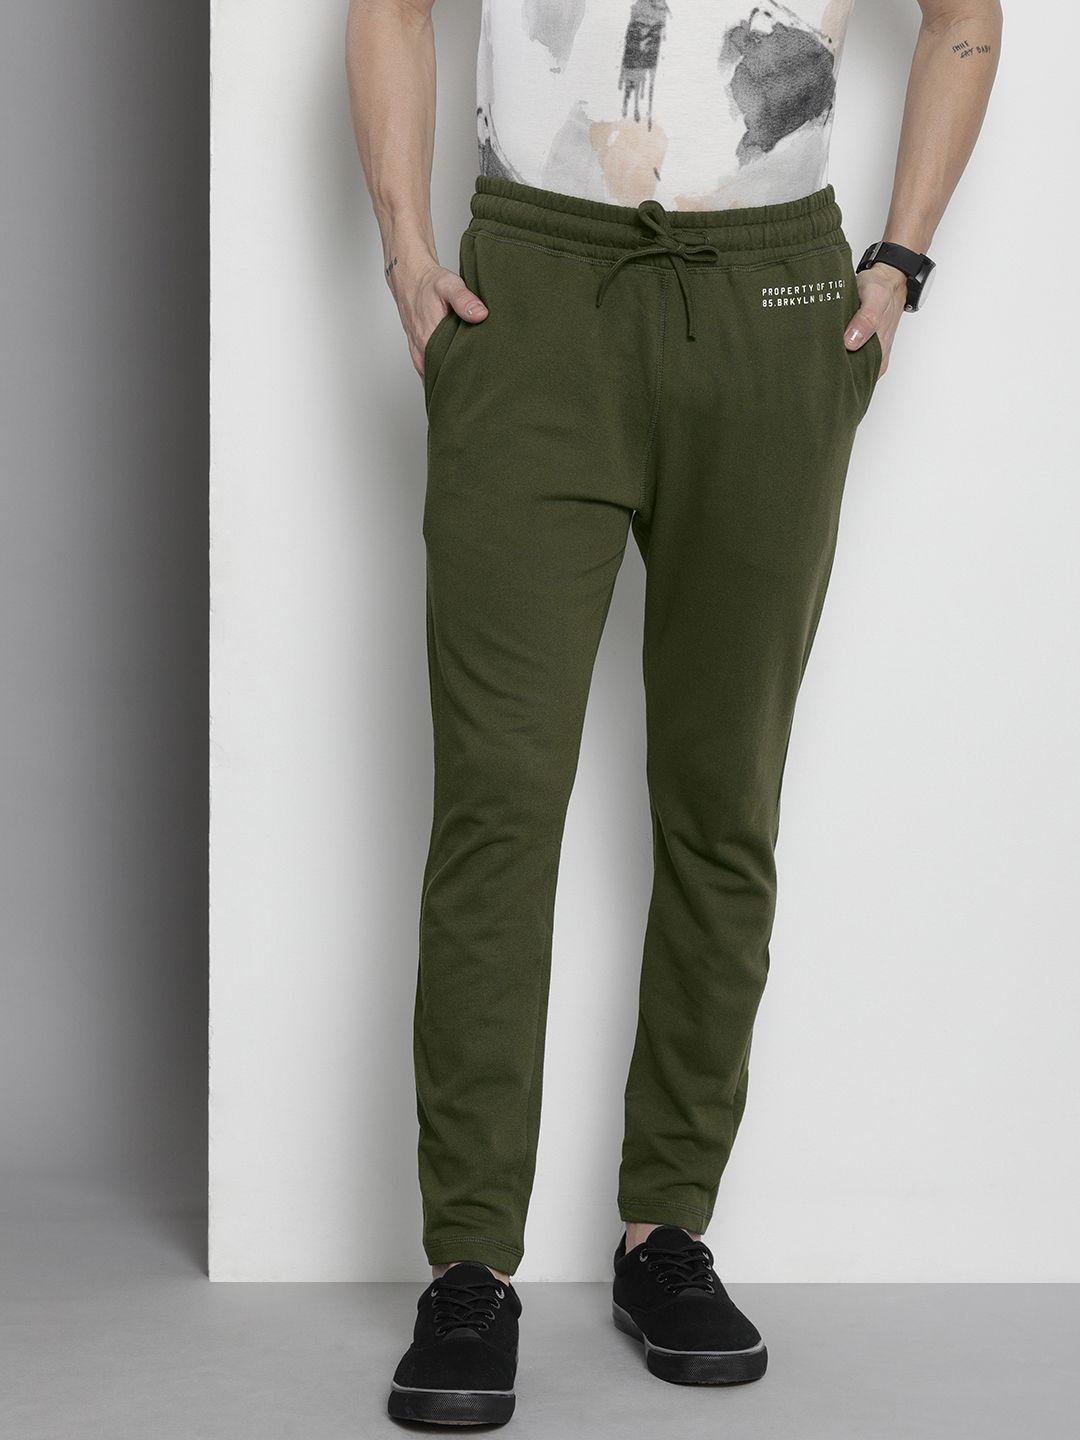 the indian garage co olive green typography printed track pants